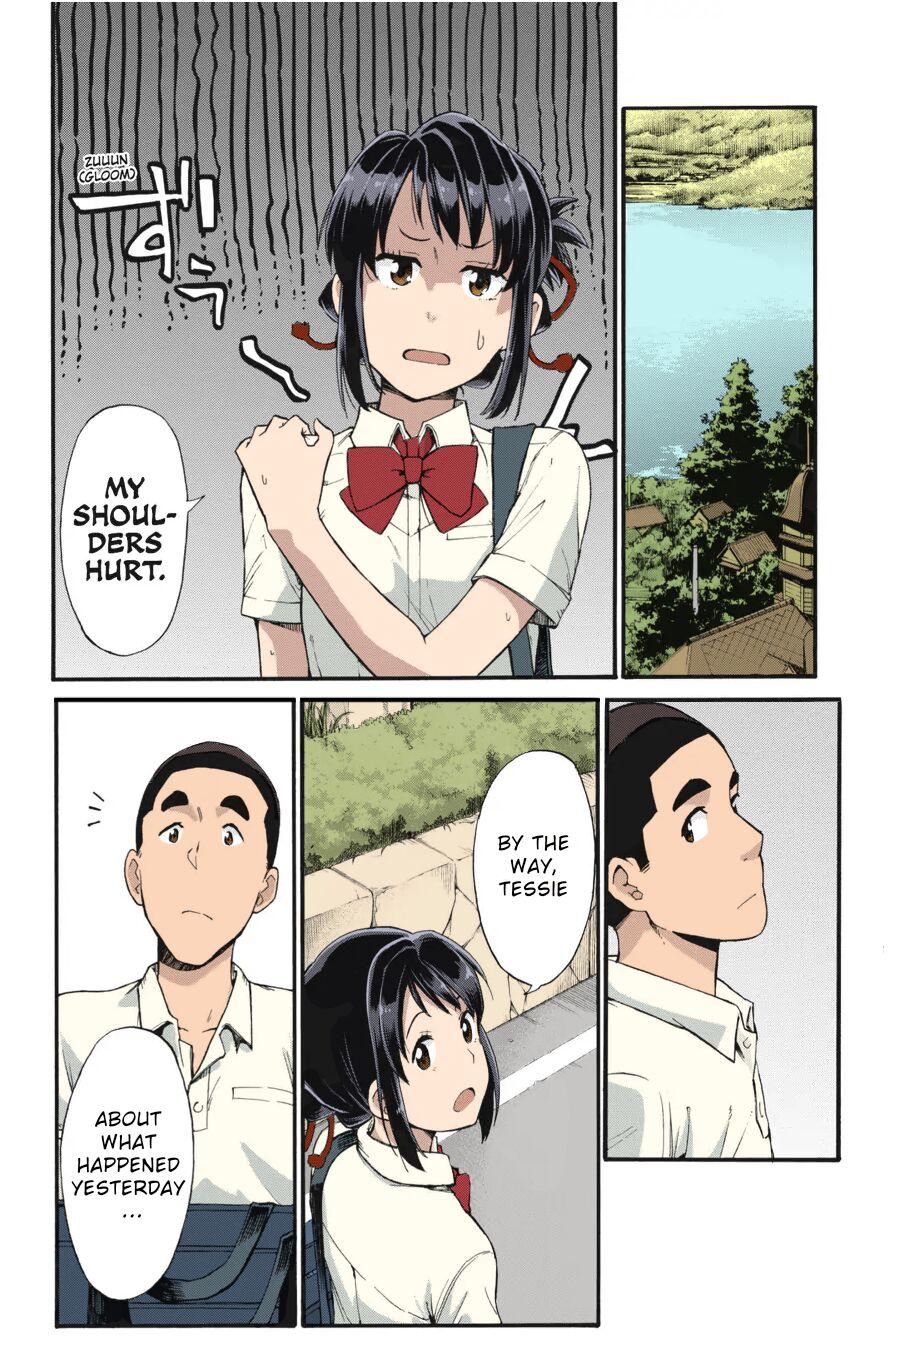 Shooting star (Kimi no Na wa. Another Side: Earthbound) [Ugeppa] (Colorized by mikakucoloring 46